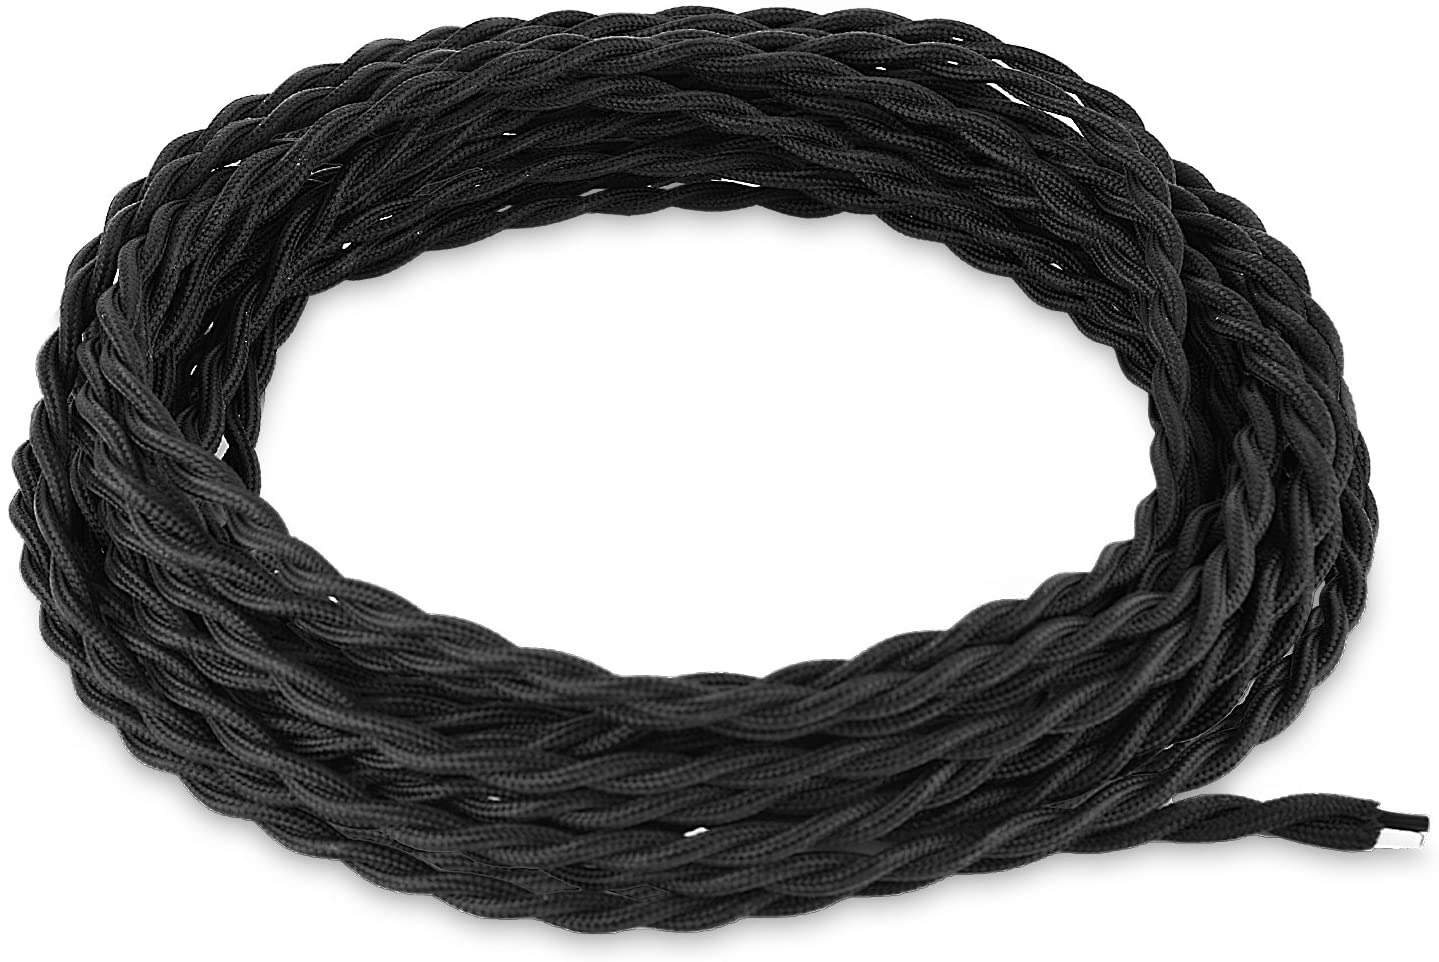 28 Ft Black Twisted Cloth Covered Wire Vintage Antique Lamp Cord Electrical Wire